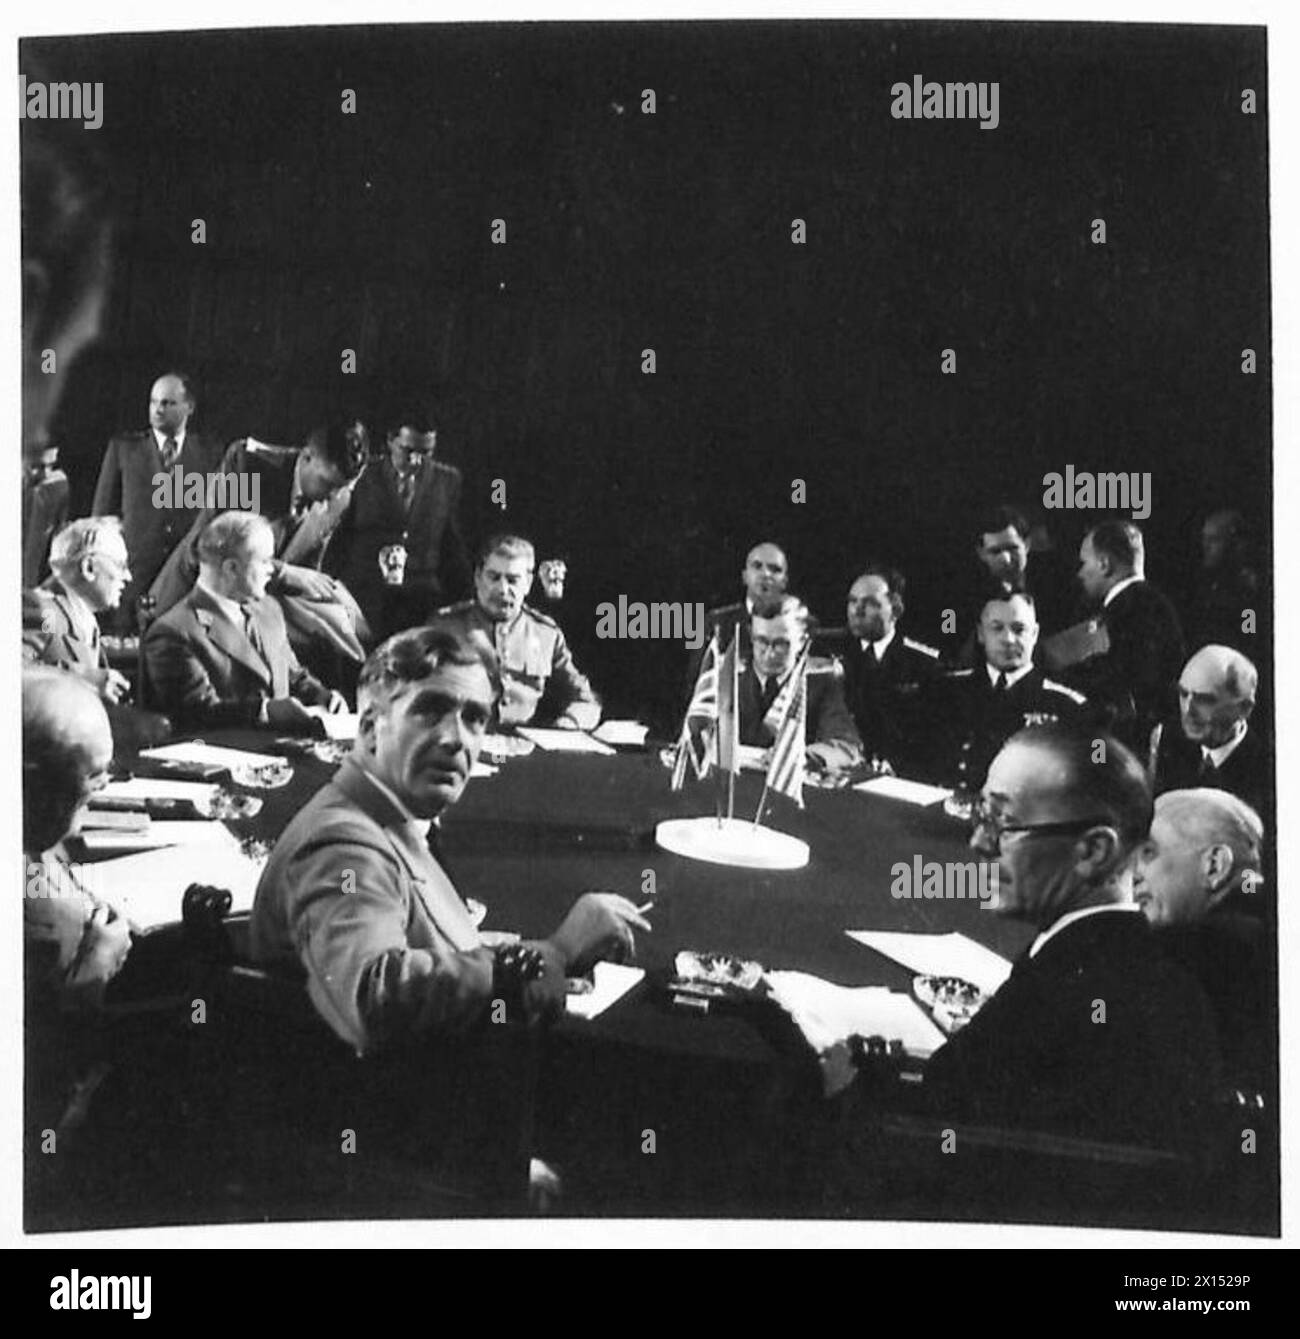 M.MOLOTOV AND M.VYSHINSKY VISIT MR. EDE - Scenes in the conference room showing the VIPs seated round the conference table British Army, 21st Army Group Stock Photo